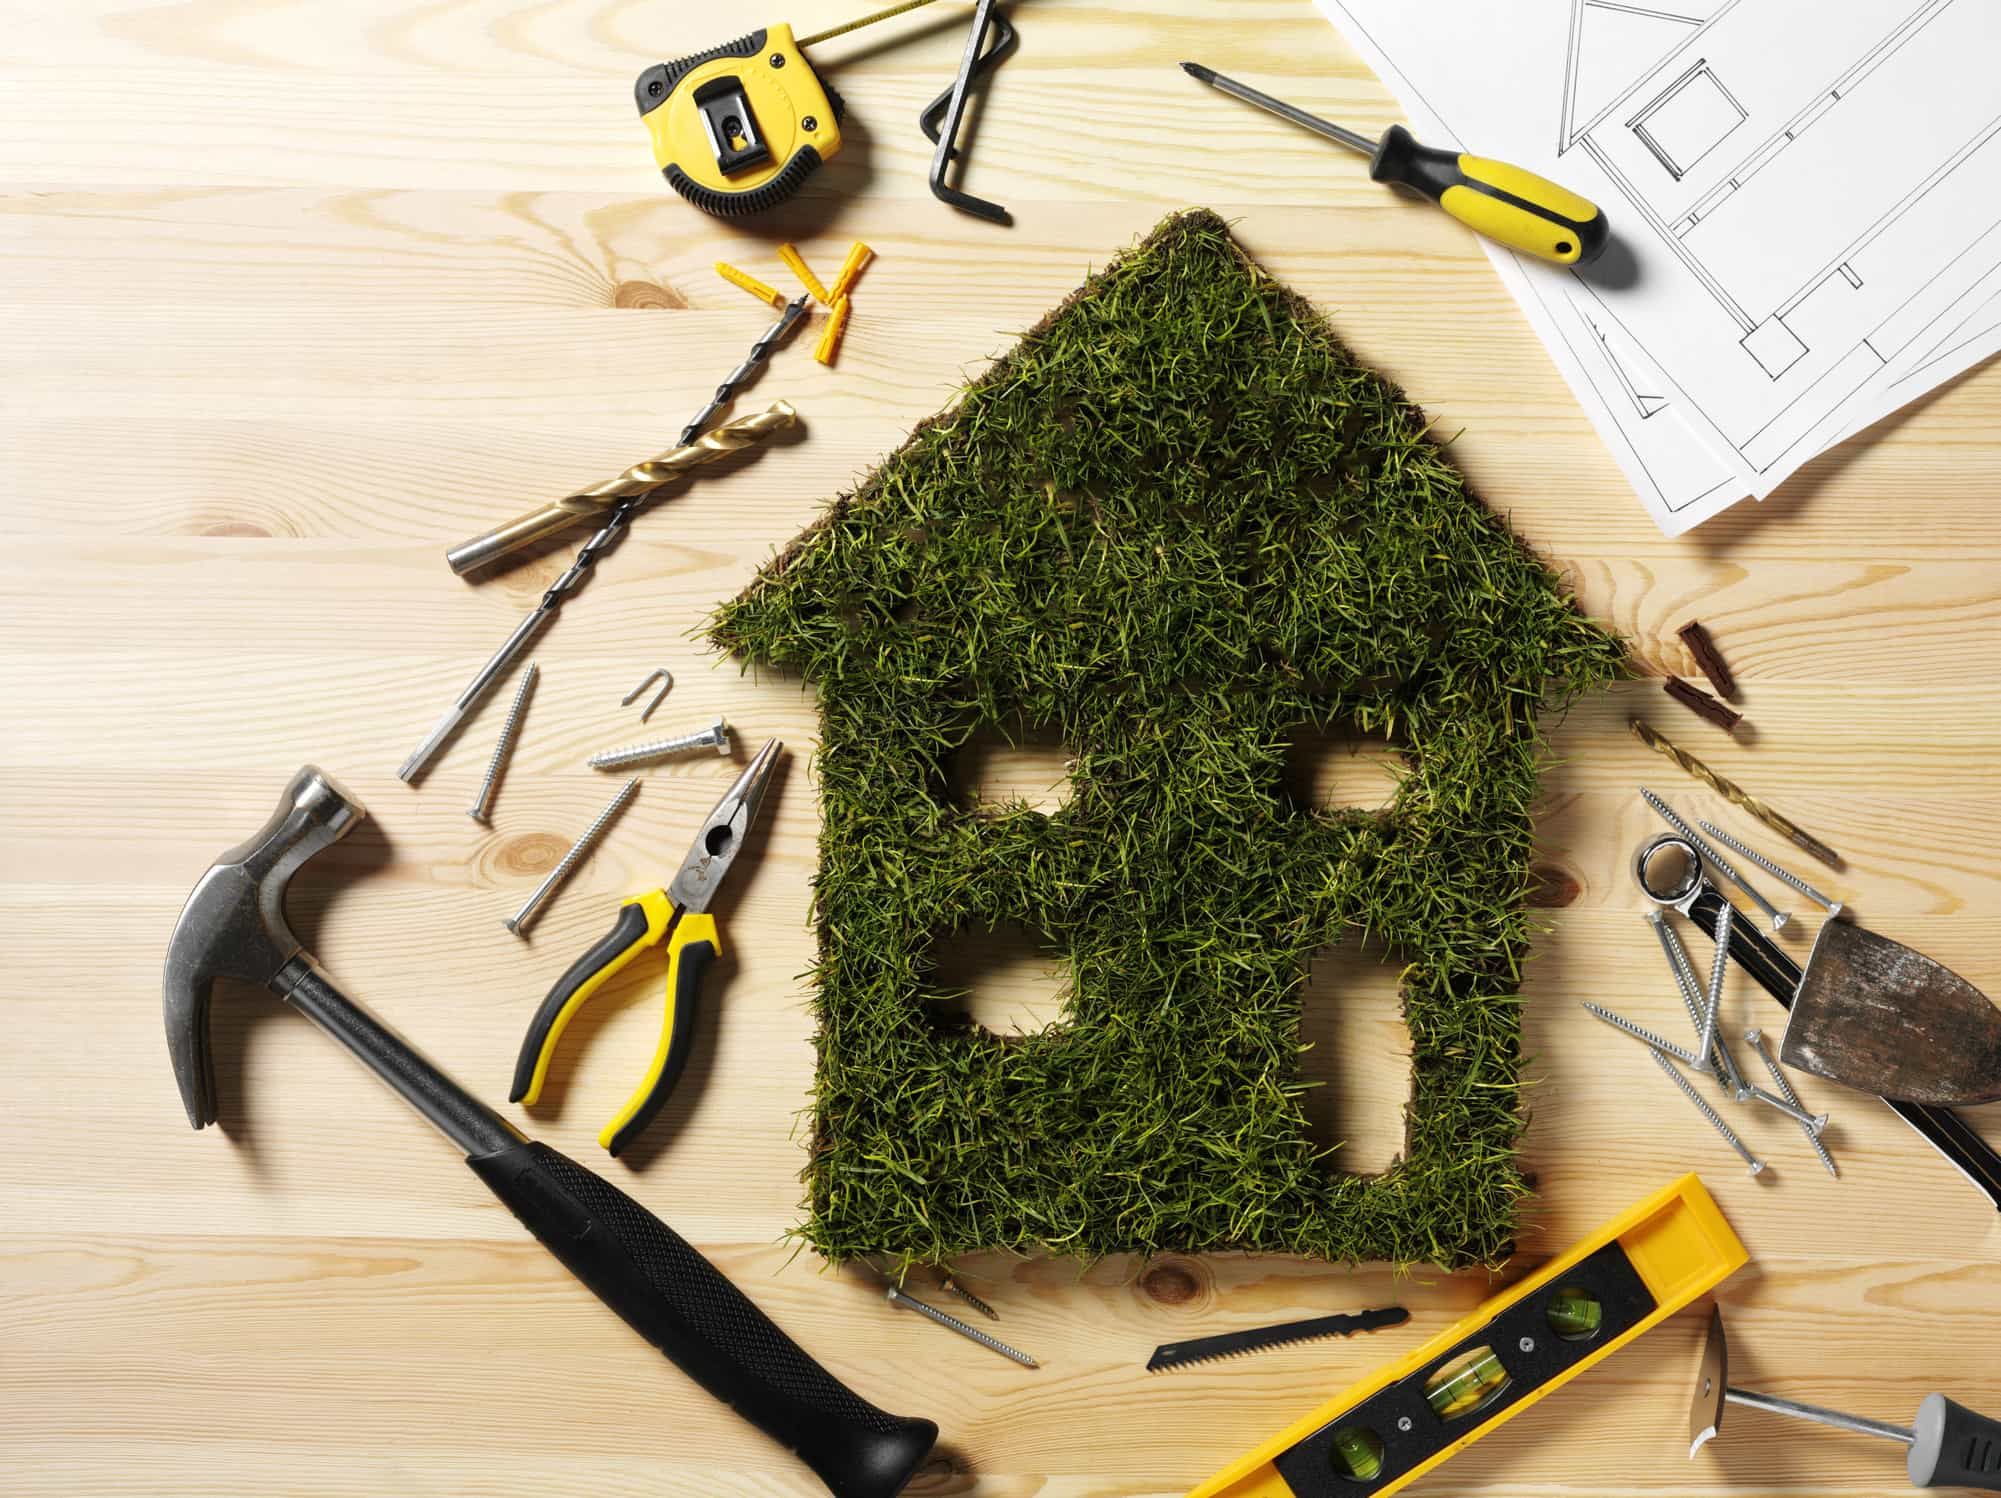 Image of house-shaped patch of grass surrounded by various building tools